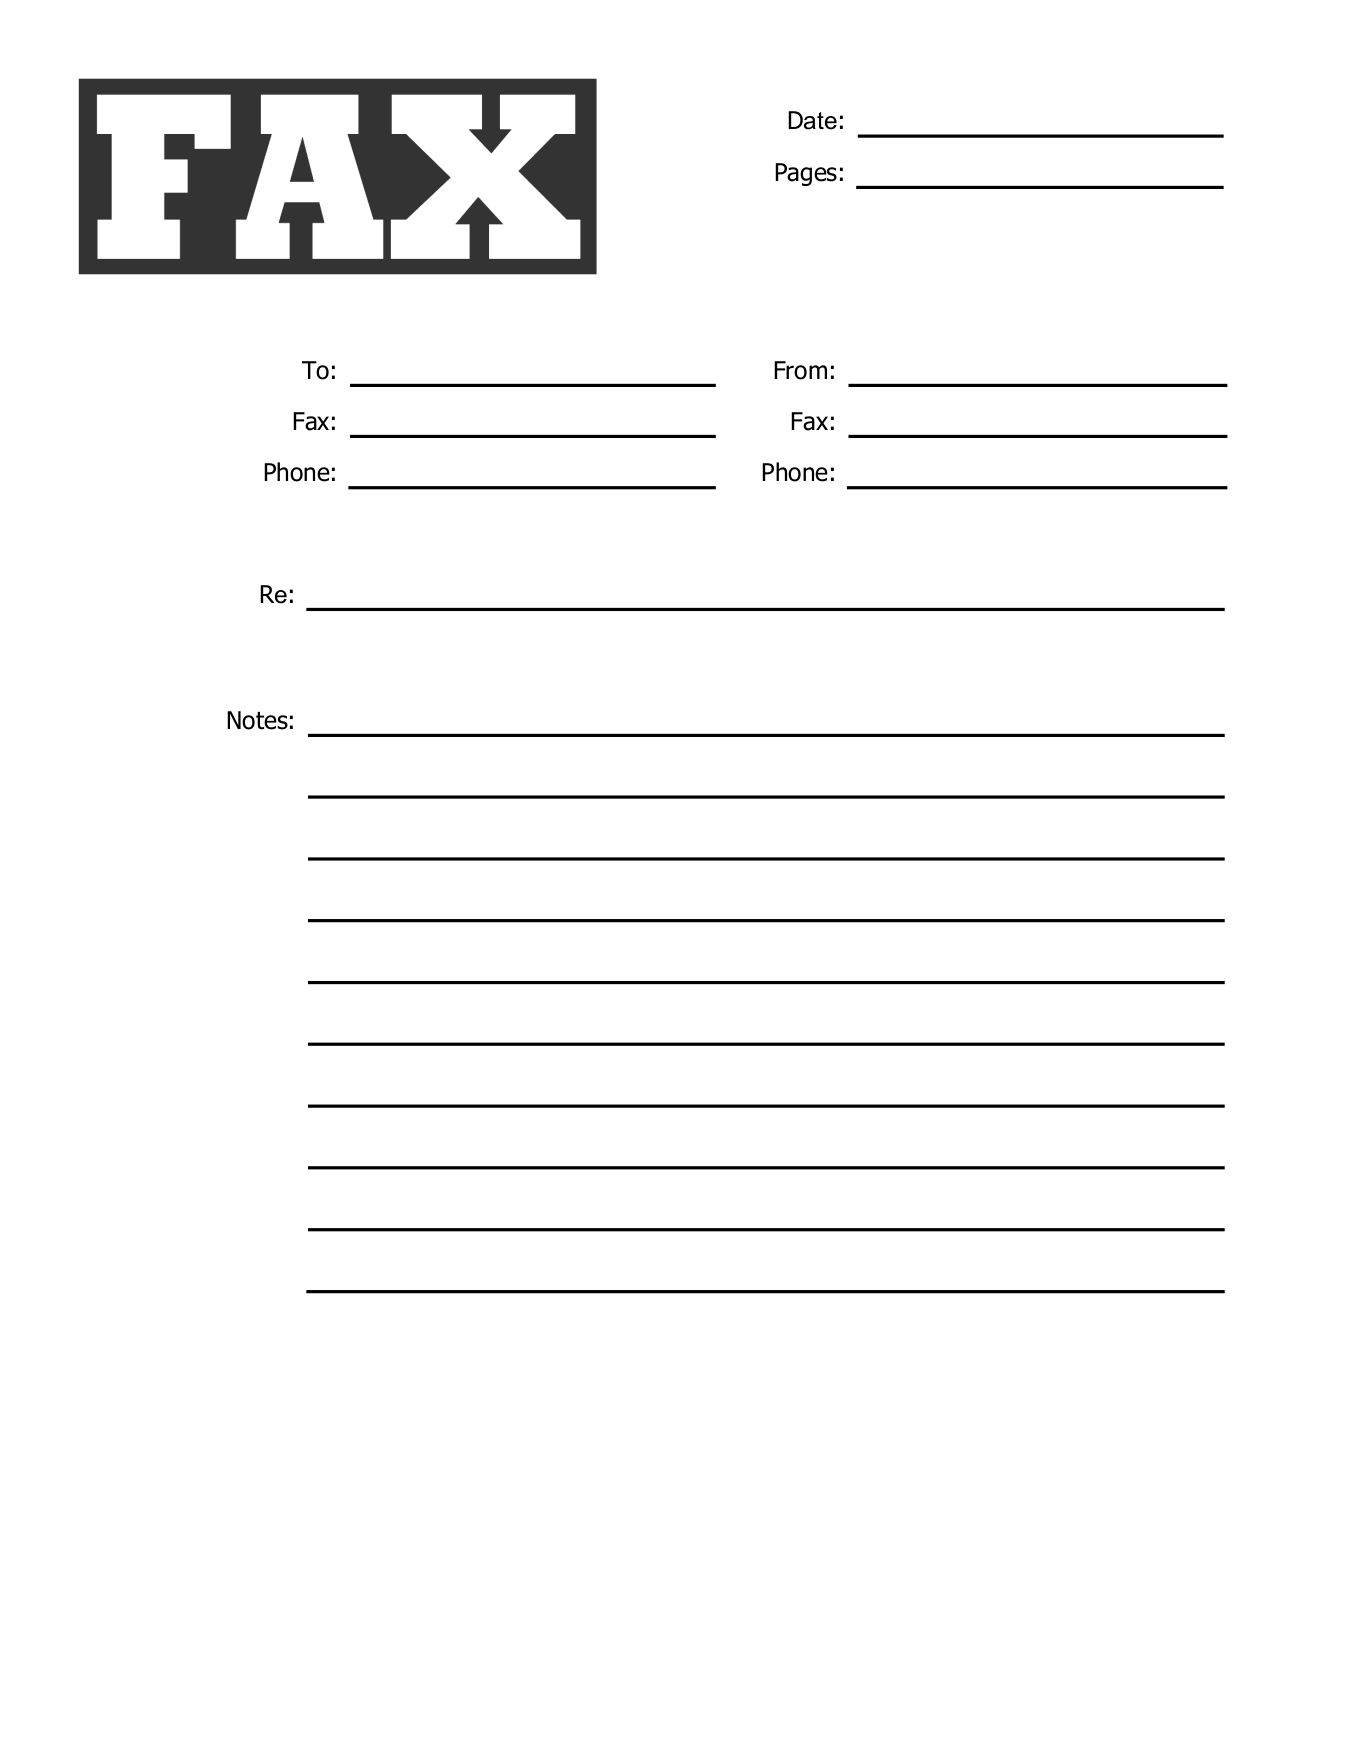 free fax cover sheet template for mac